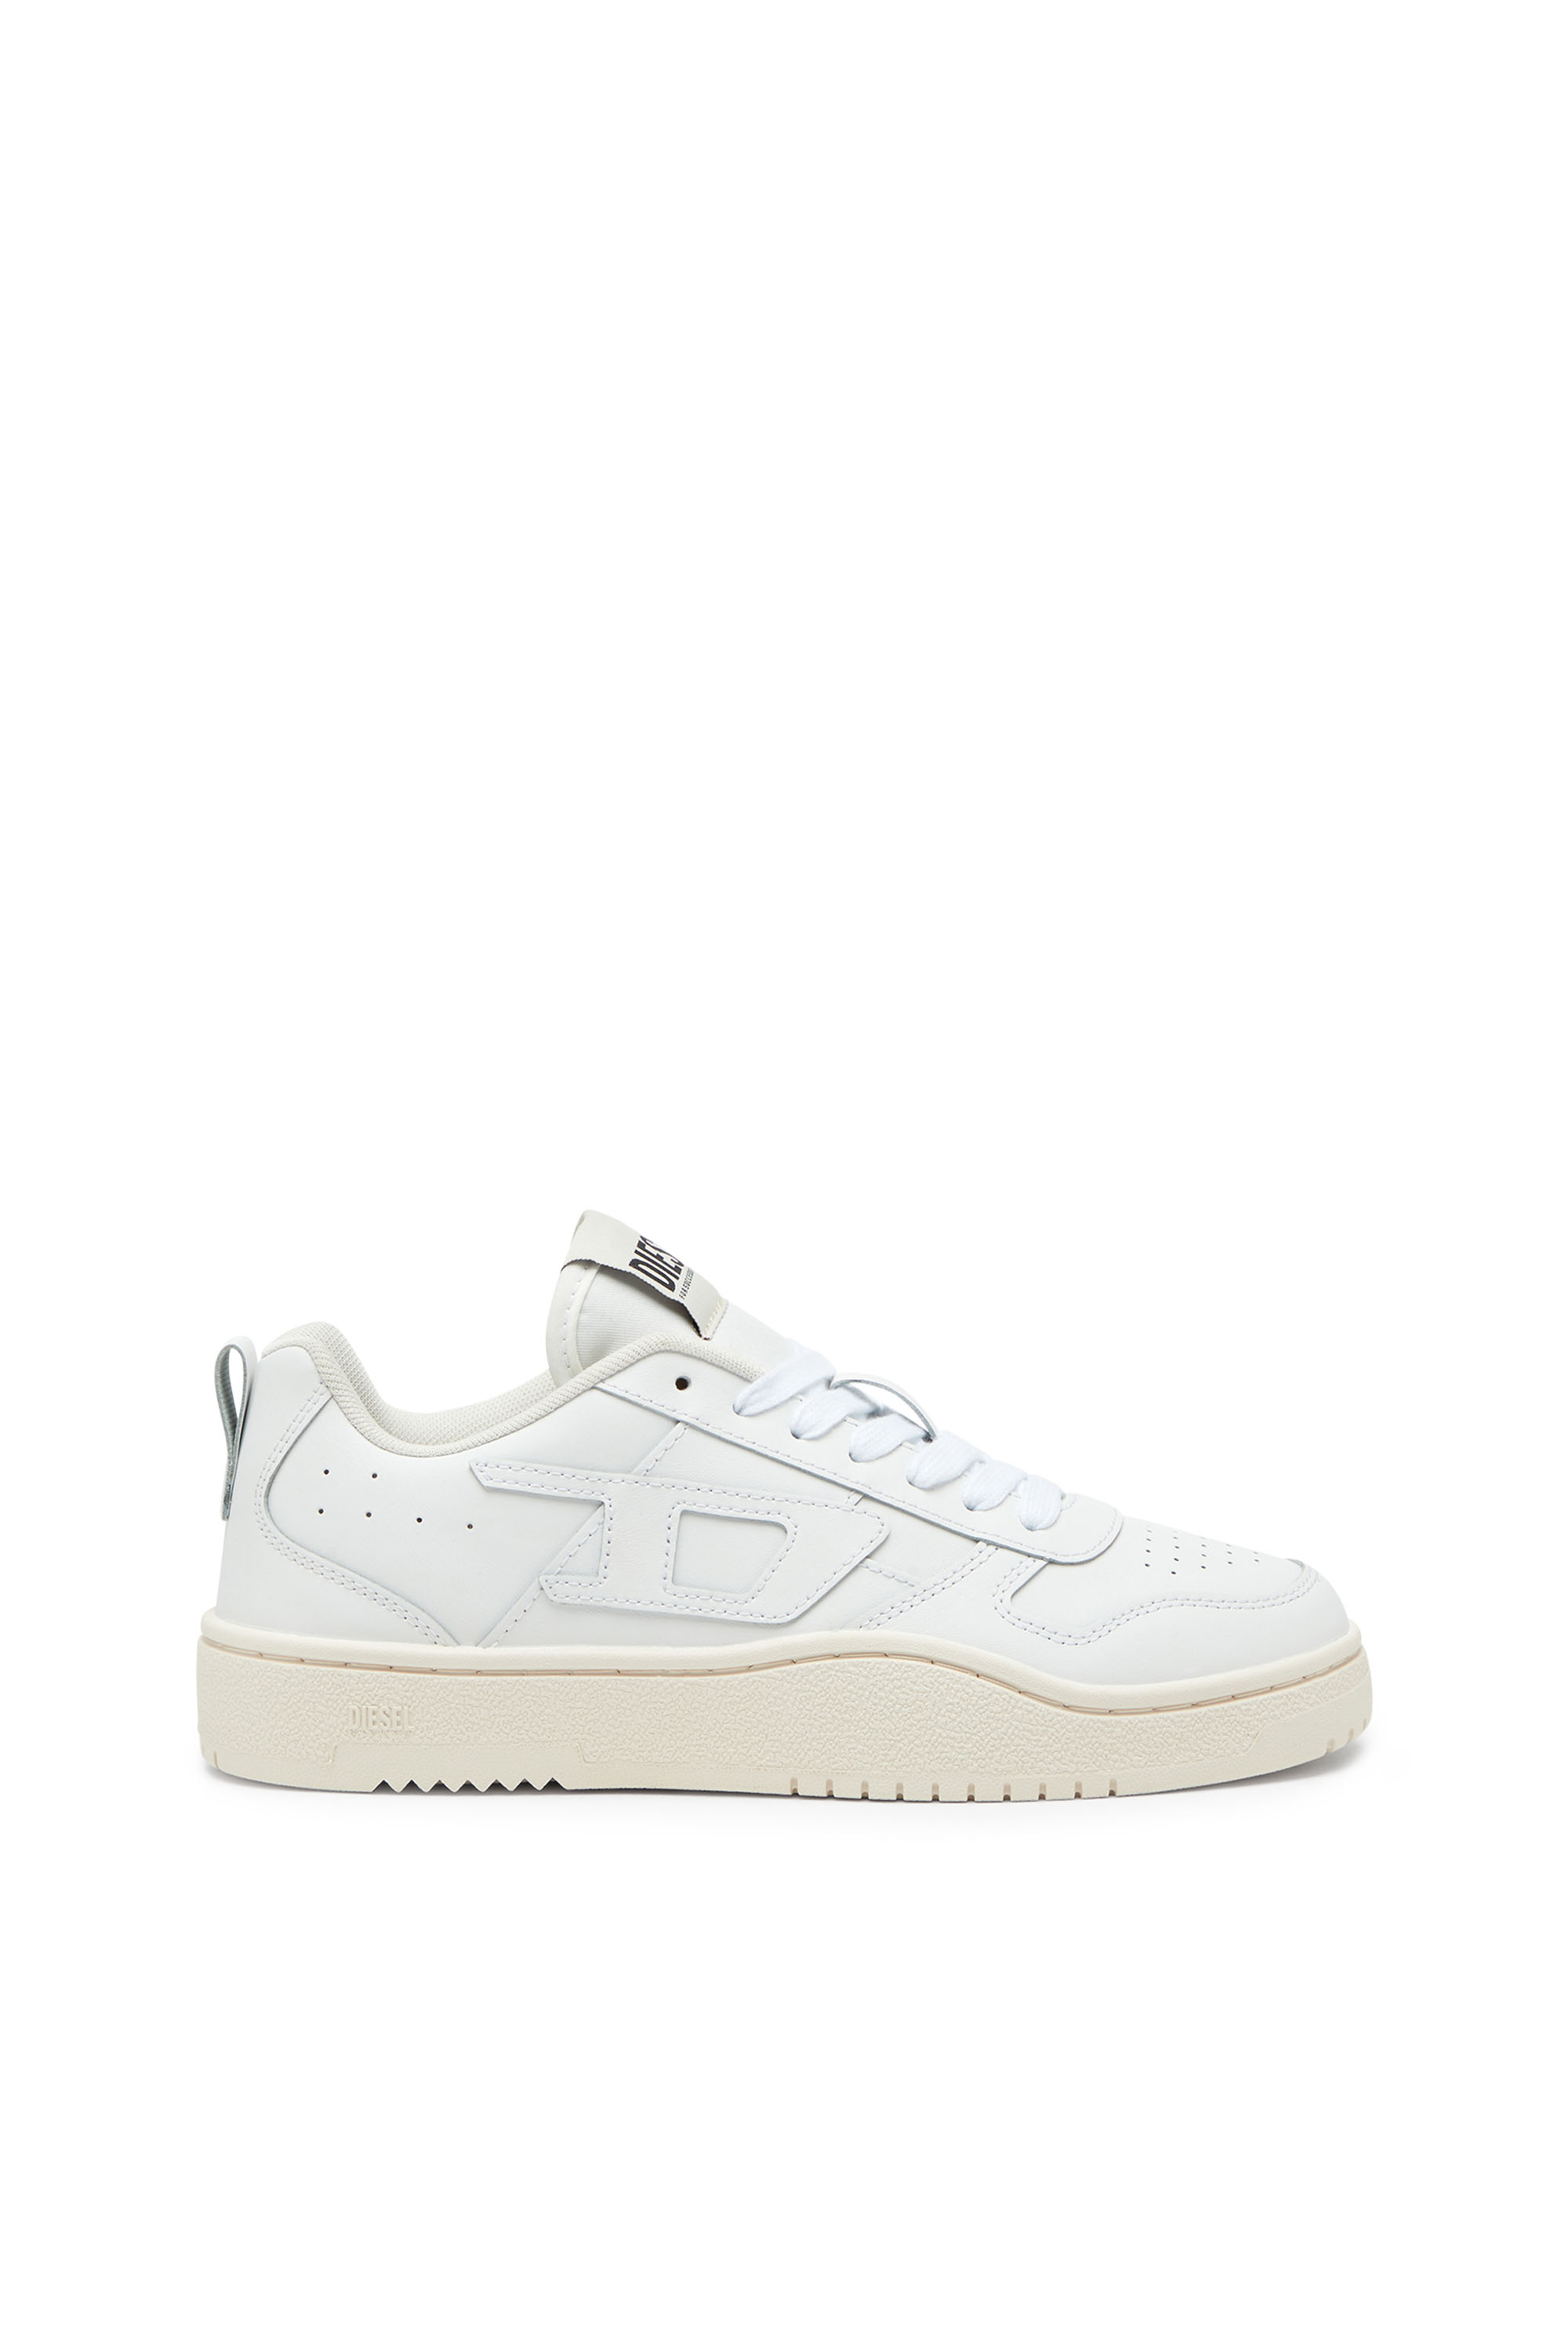 Diesel - S-UKIYO V2 LOW W, Woman S-Ukiyo Low-Low-top sneakers in leather and nylon in White - Image 1